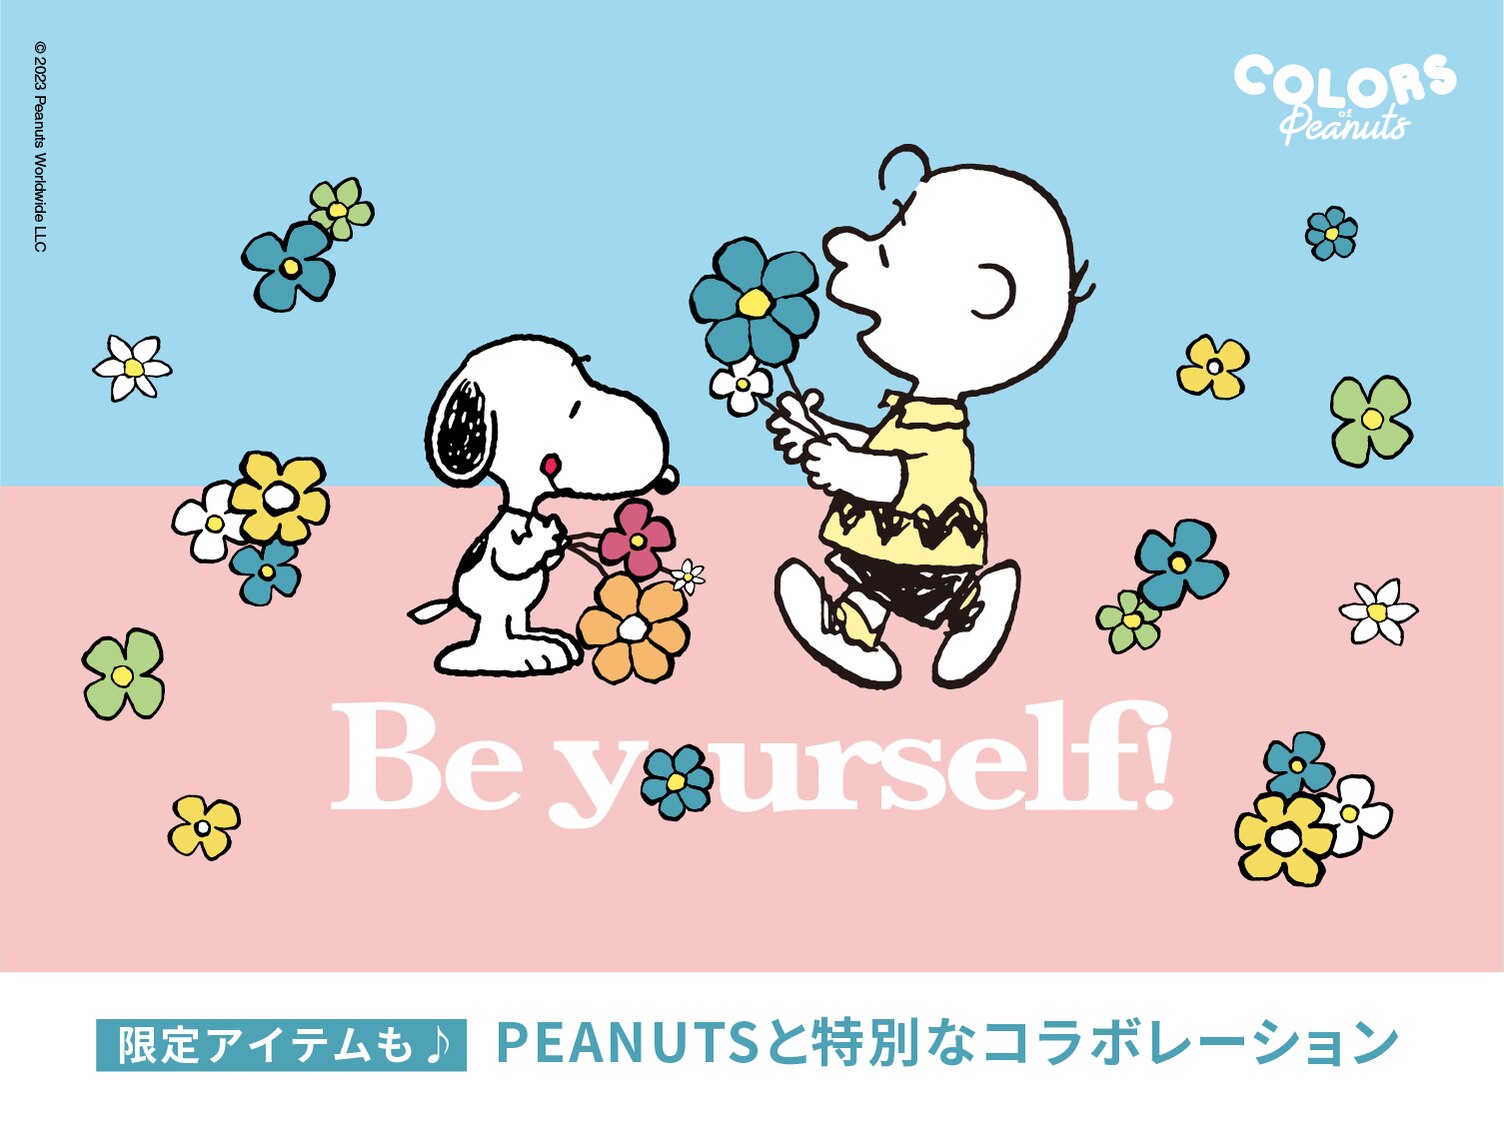 Be your self! COLOR of Peanuts